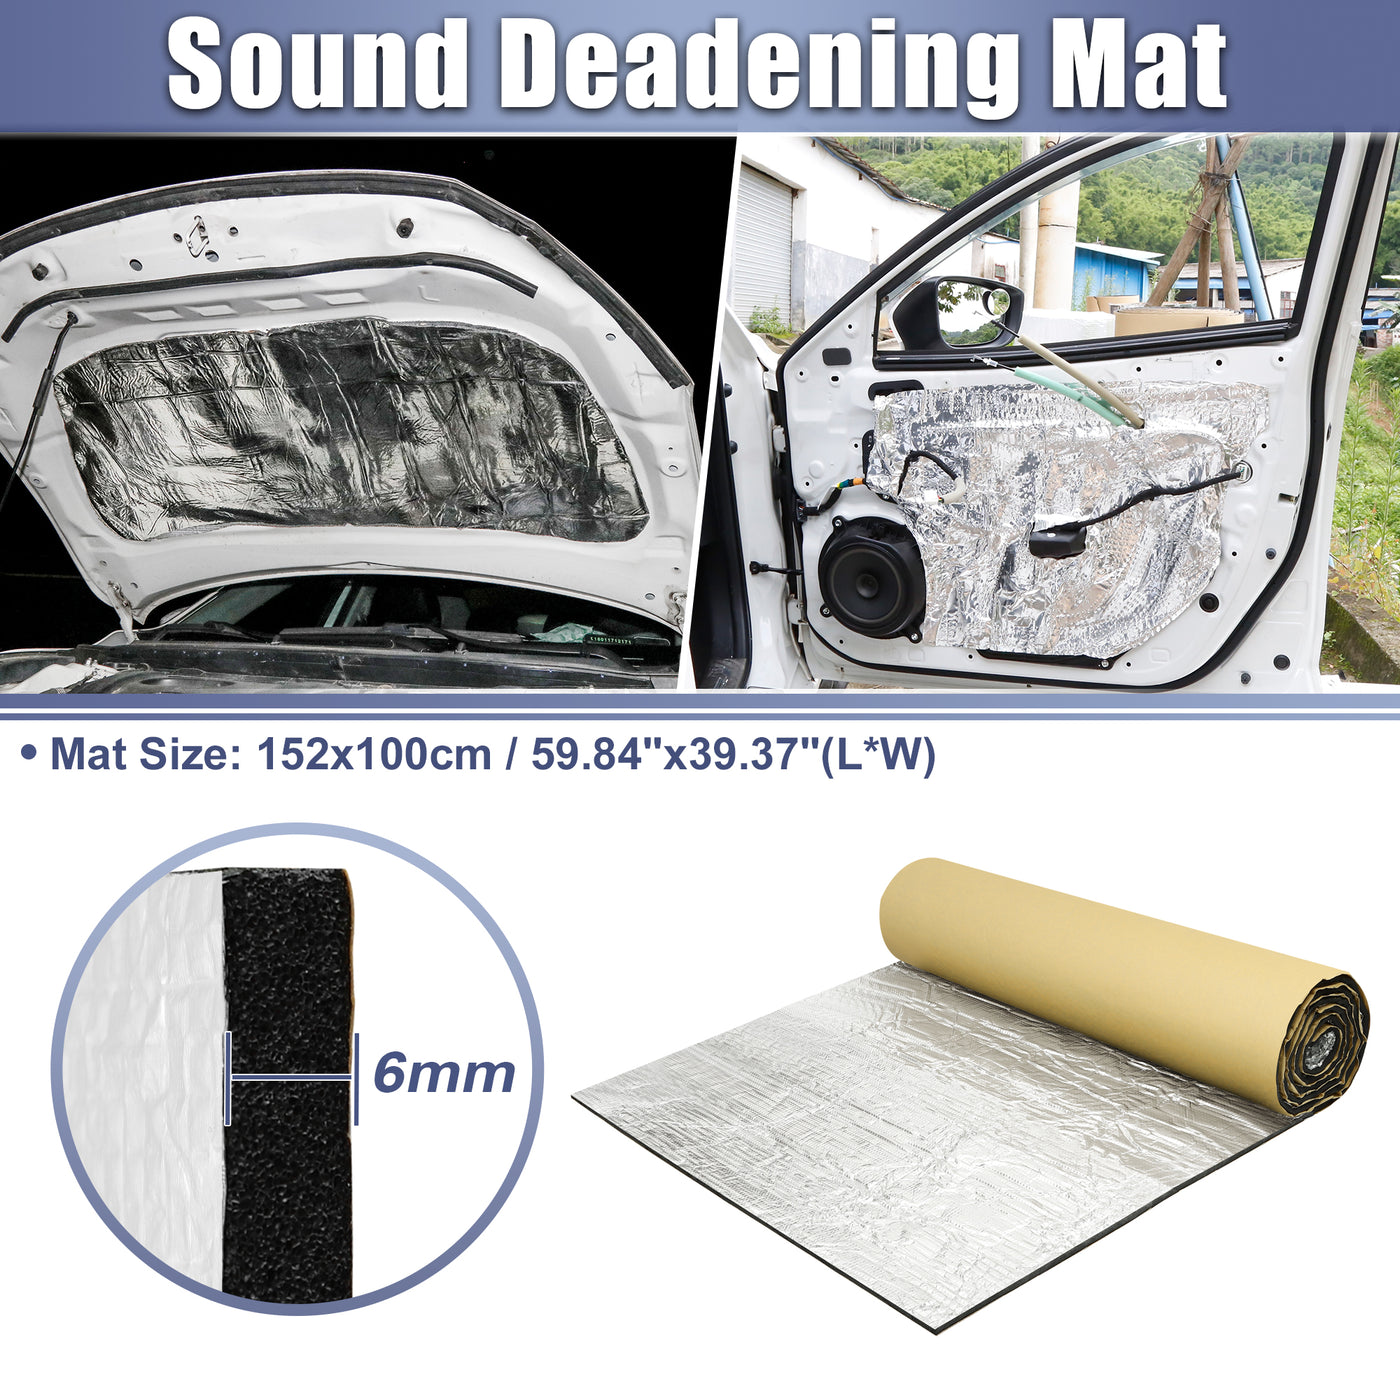 X AUTOHAUX 236mil 6mm 16.36sqft Car Sound Deadening Mat Aluminum Closed Cell Foam Heat Shield Material Damping Self Adhesive Universal for Hood Fender and Boat Engine Cover 59.84"x39.37"